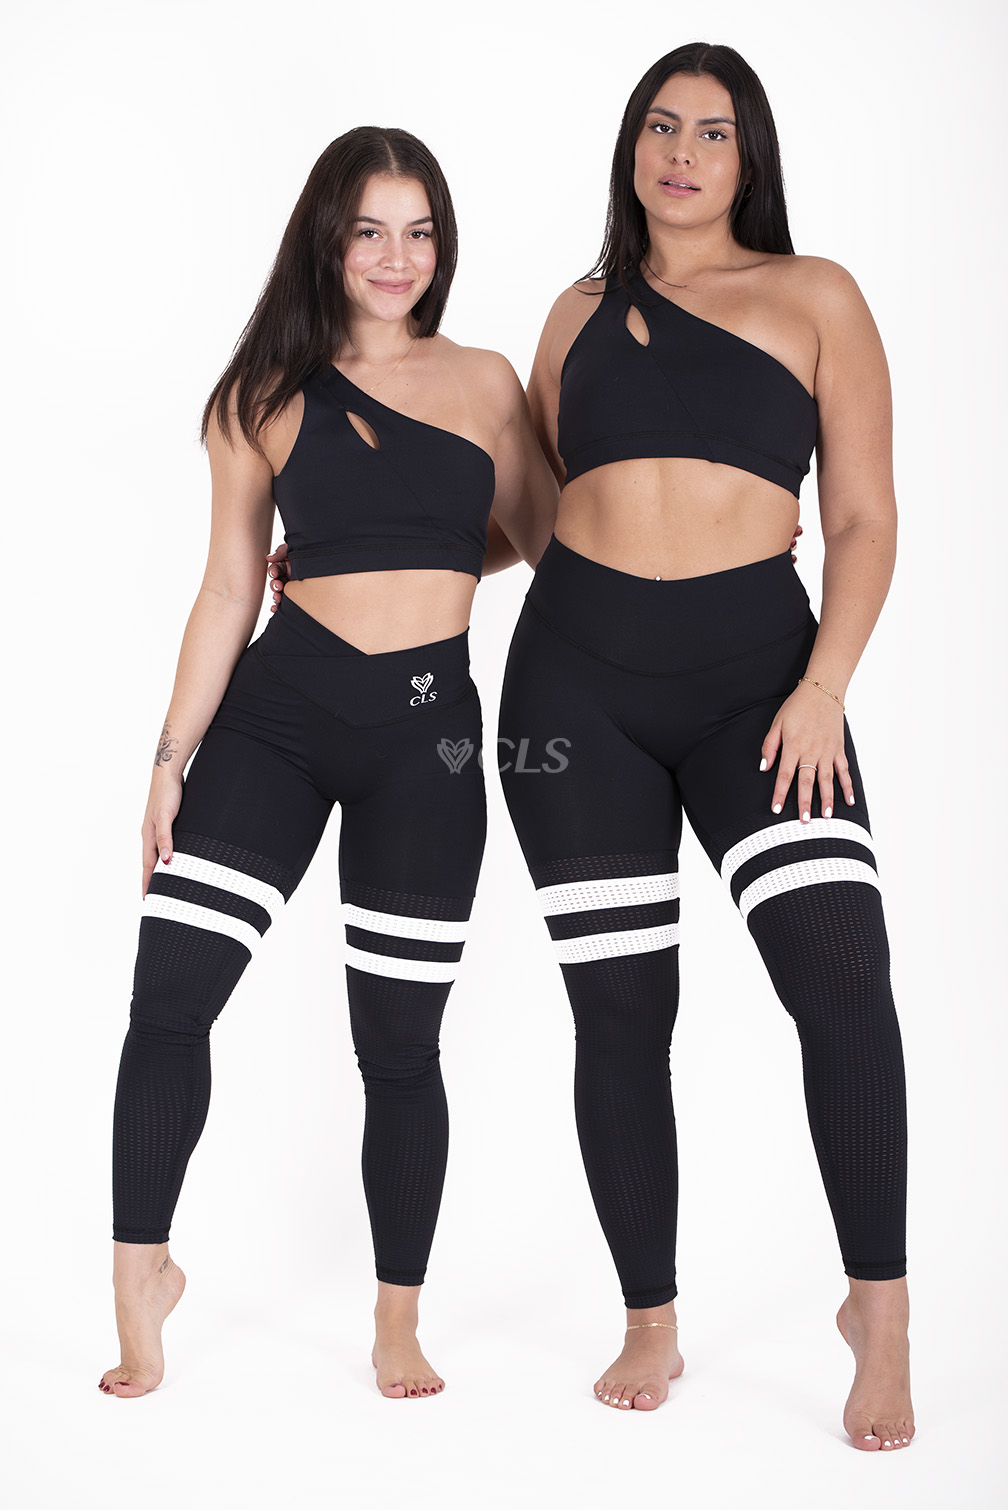 Create Your Own Seamless Front Striped Leggings Additional Colors  (Custom-Made), Cls Leggins